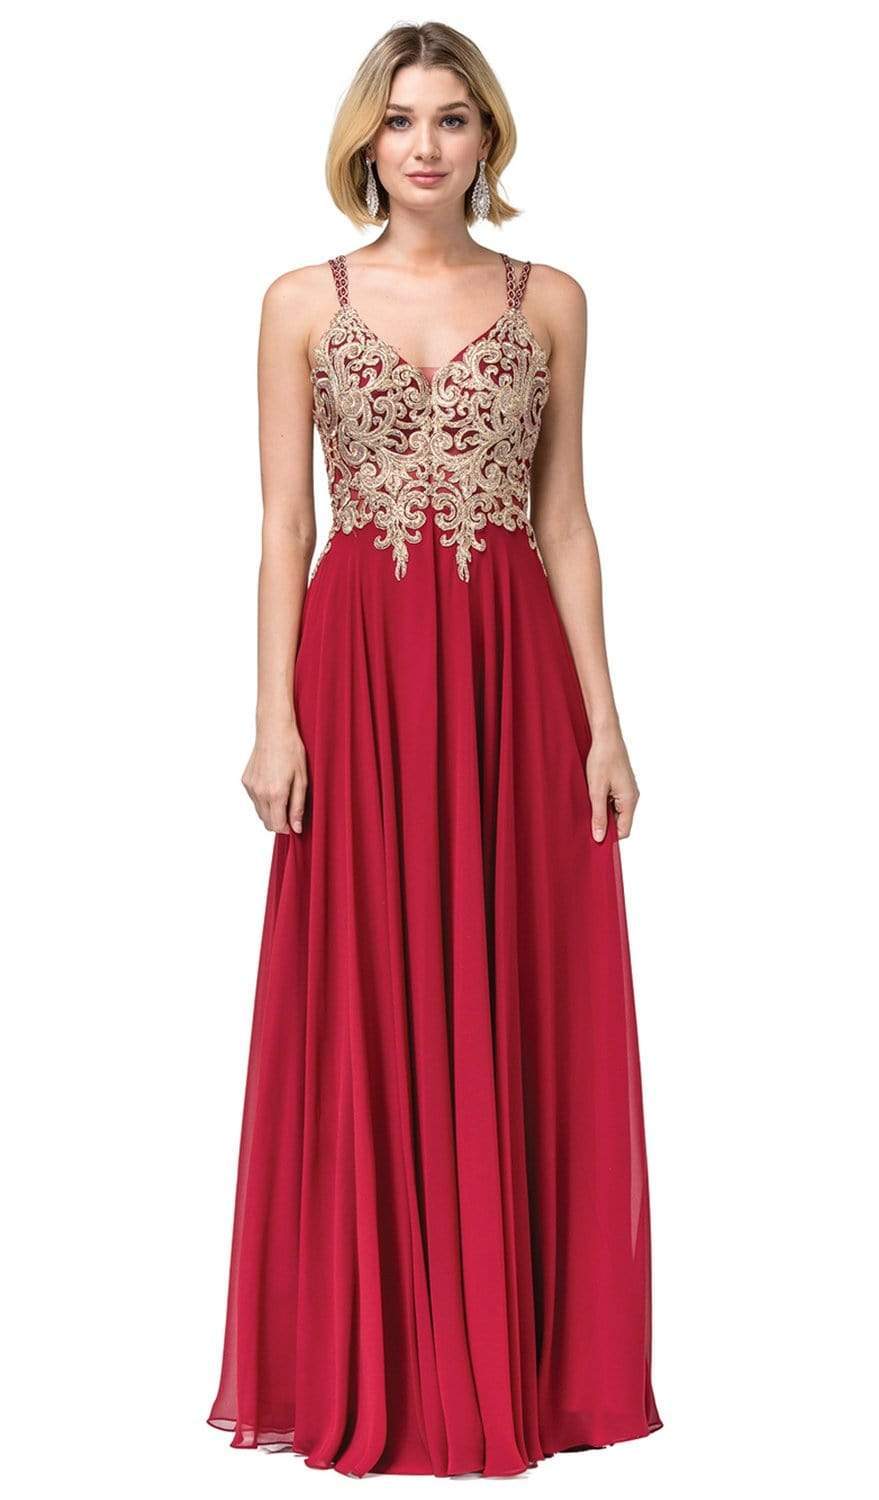 Dancing Queen - 2890 Embroidered Plunging V-neck A-line Dress Evening Dresses XS / Burgundy/Gold